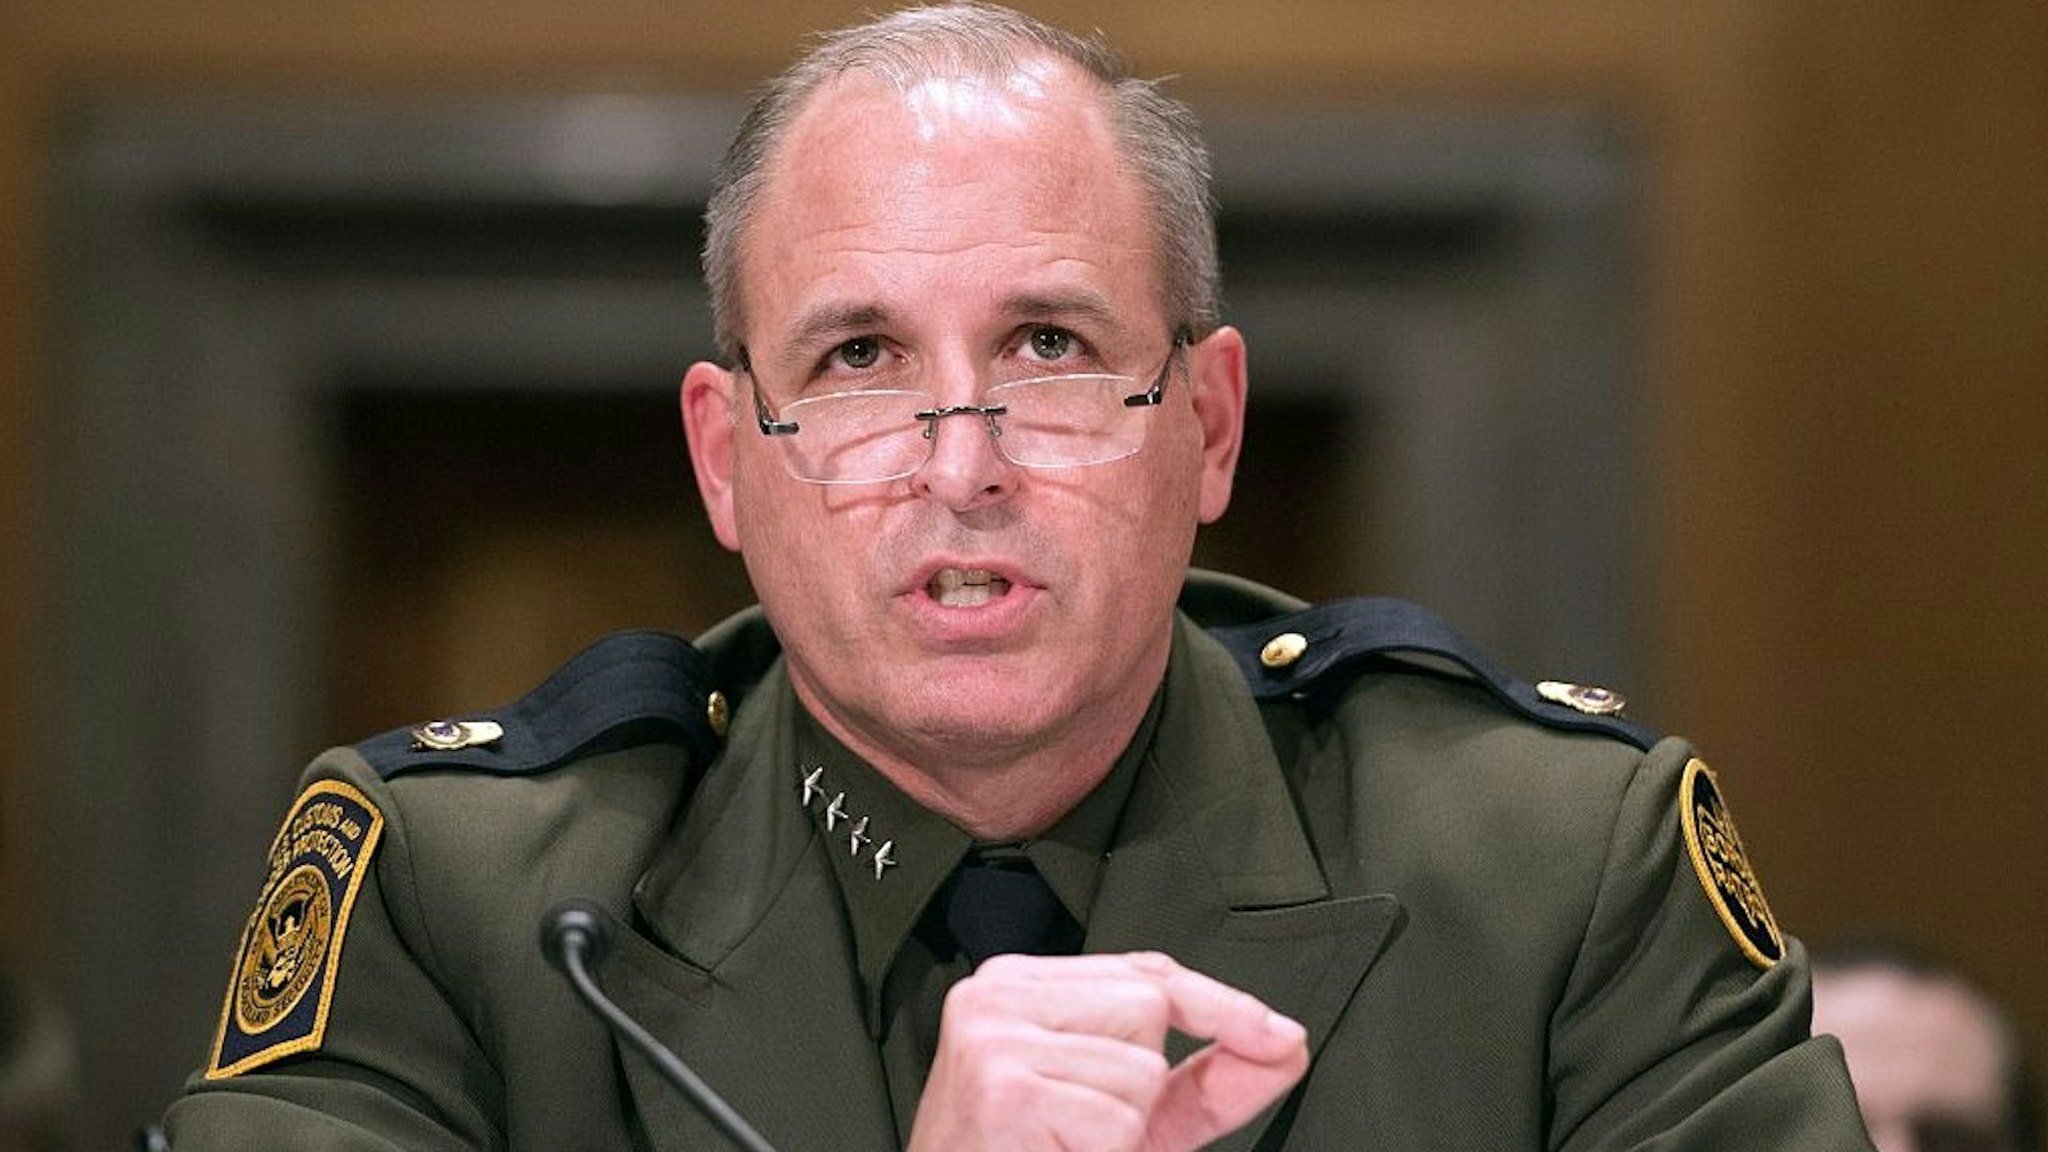 Mark Morgan, chief of the US Border Patrol, testifies at a Senate Homeland Security and Governmental Affairs Committee hearing on "Initial Observations of the New Leadership at the US Border Patrol" on Capitol Hill in Washington, DC, on November 30, 2016. / AFP / NICHOLAS KAMM (Photo credit should read